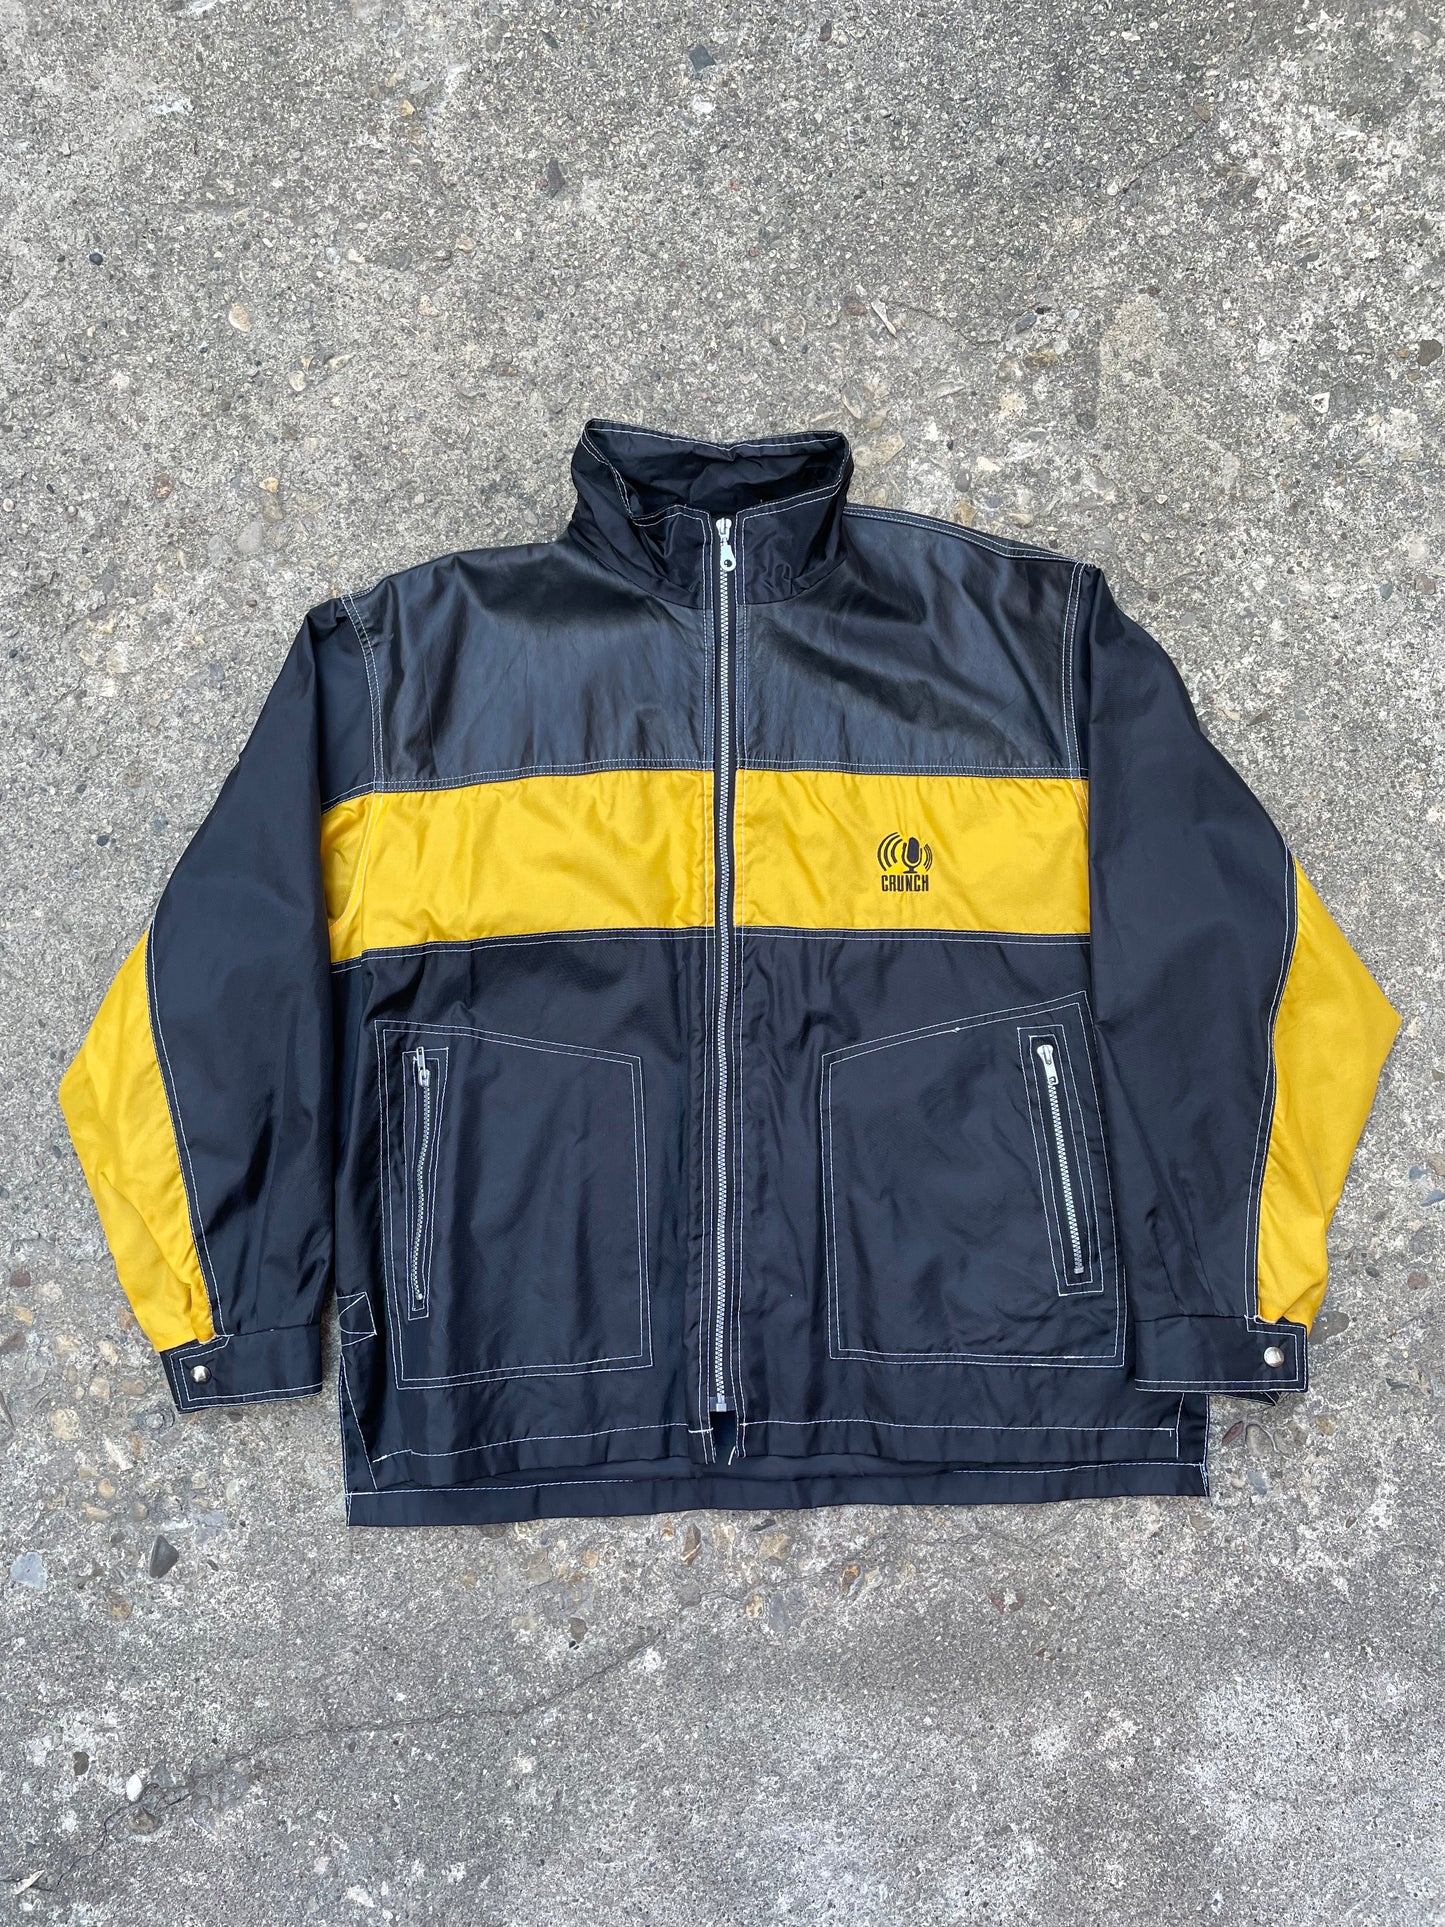 1990's Crunch Recording Group Jacket - XL